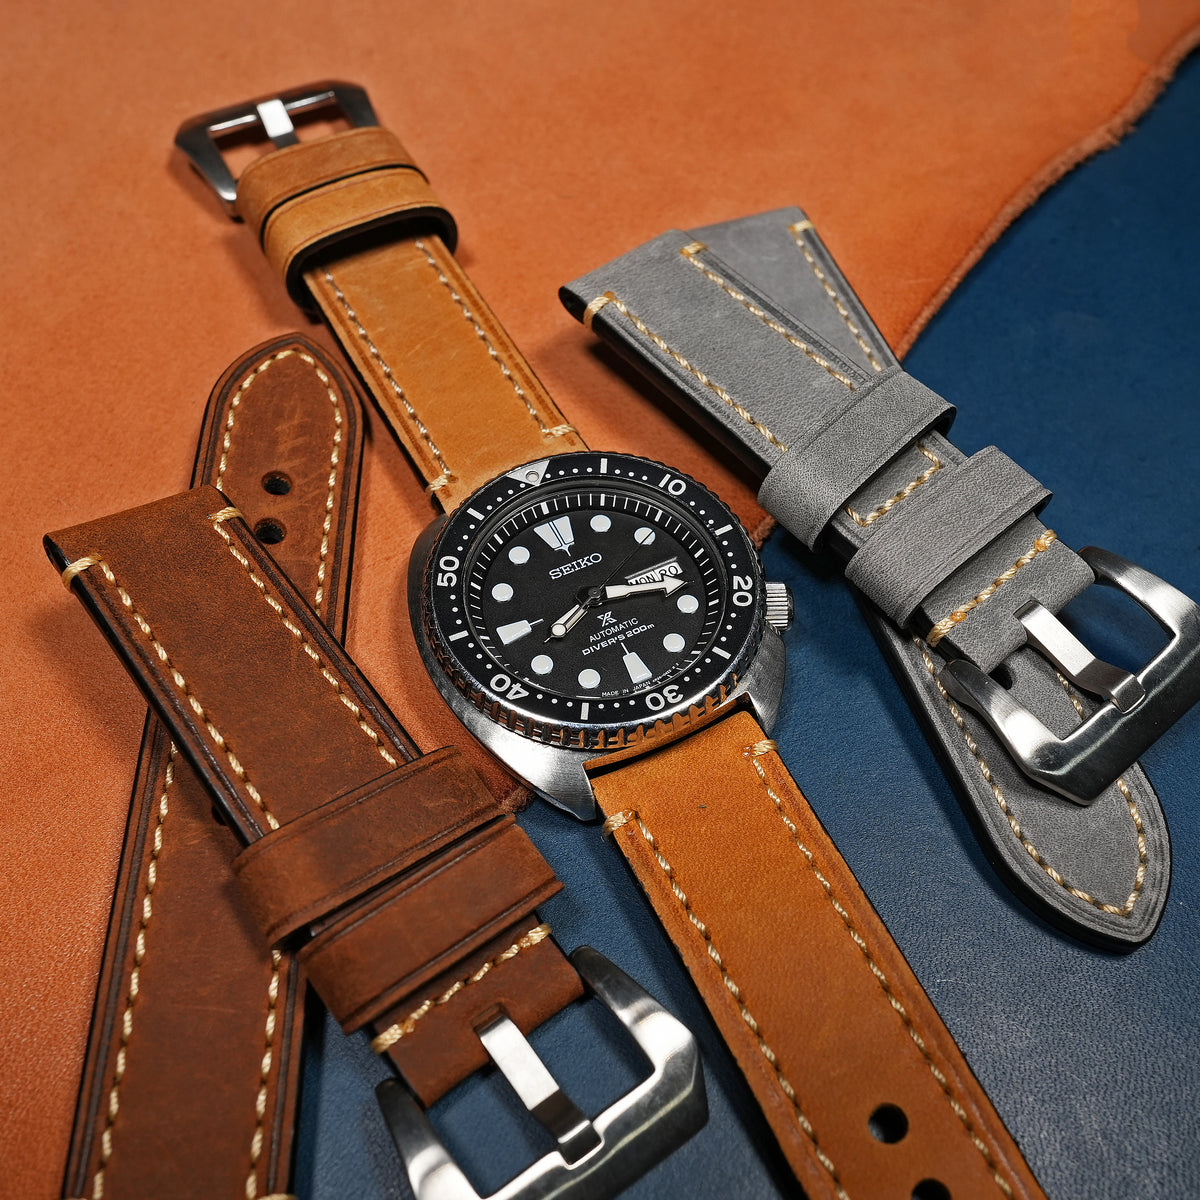 M1 Vintage Leather Watch Strap in Tan - Nomad Watch Works SG